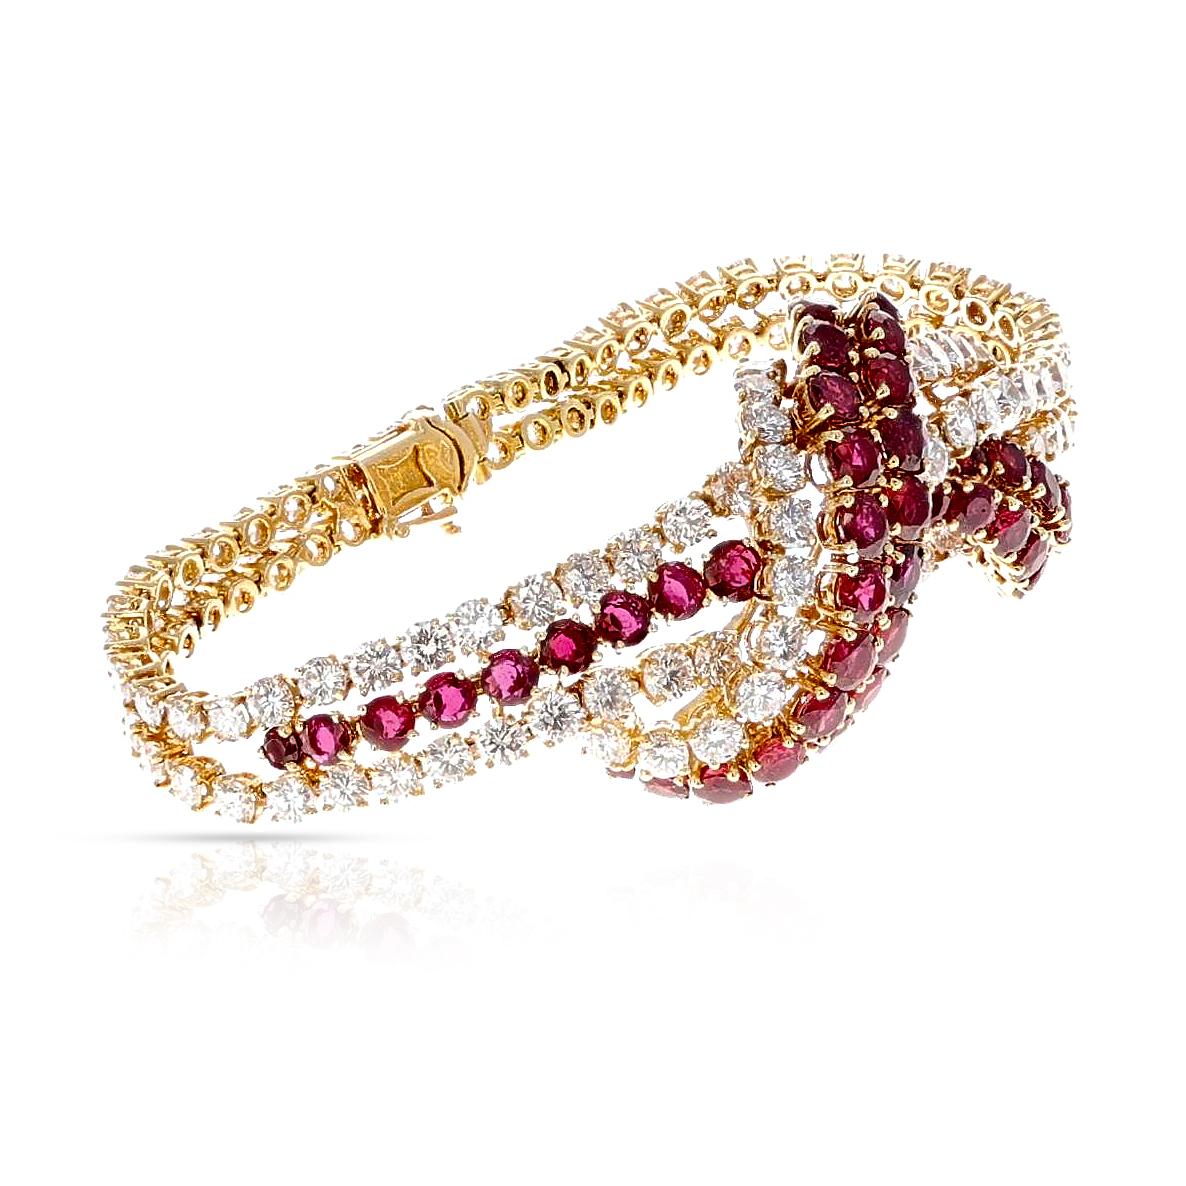 A stunning and rare 1970s French Ruby and Diamond Bracelet by Andre Vassort and M. Gerard, former Van Cleef & Arpels designers. 18K Yellow Gold. Signed and numbered. Total weight of the rubies is appx. 11.50 carats and the total weight of the